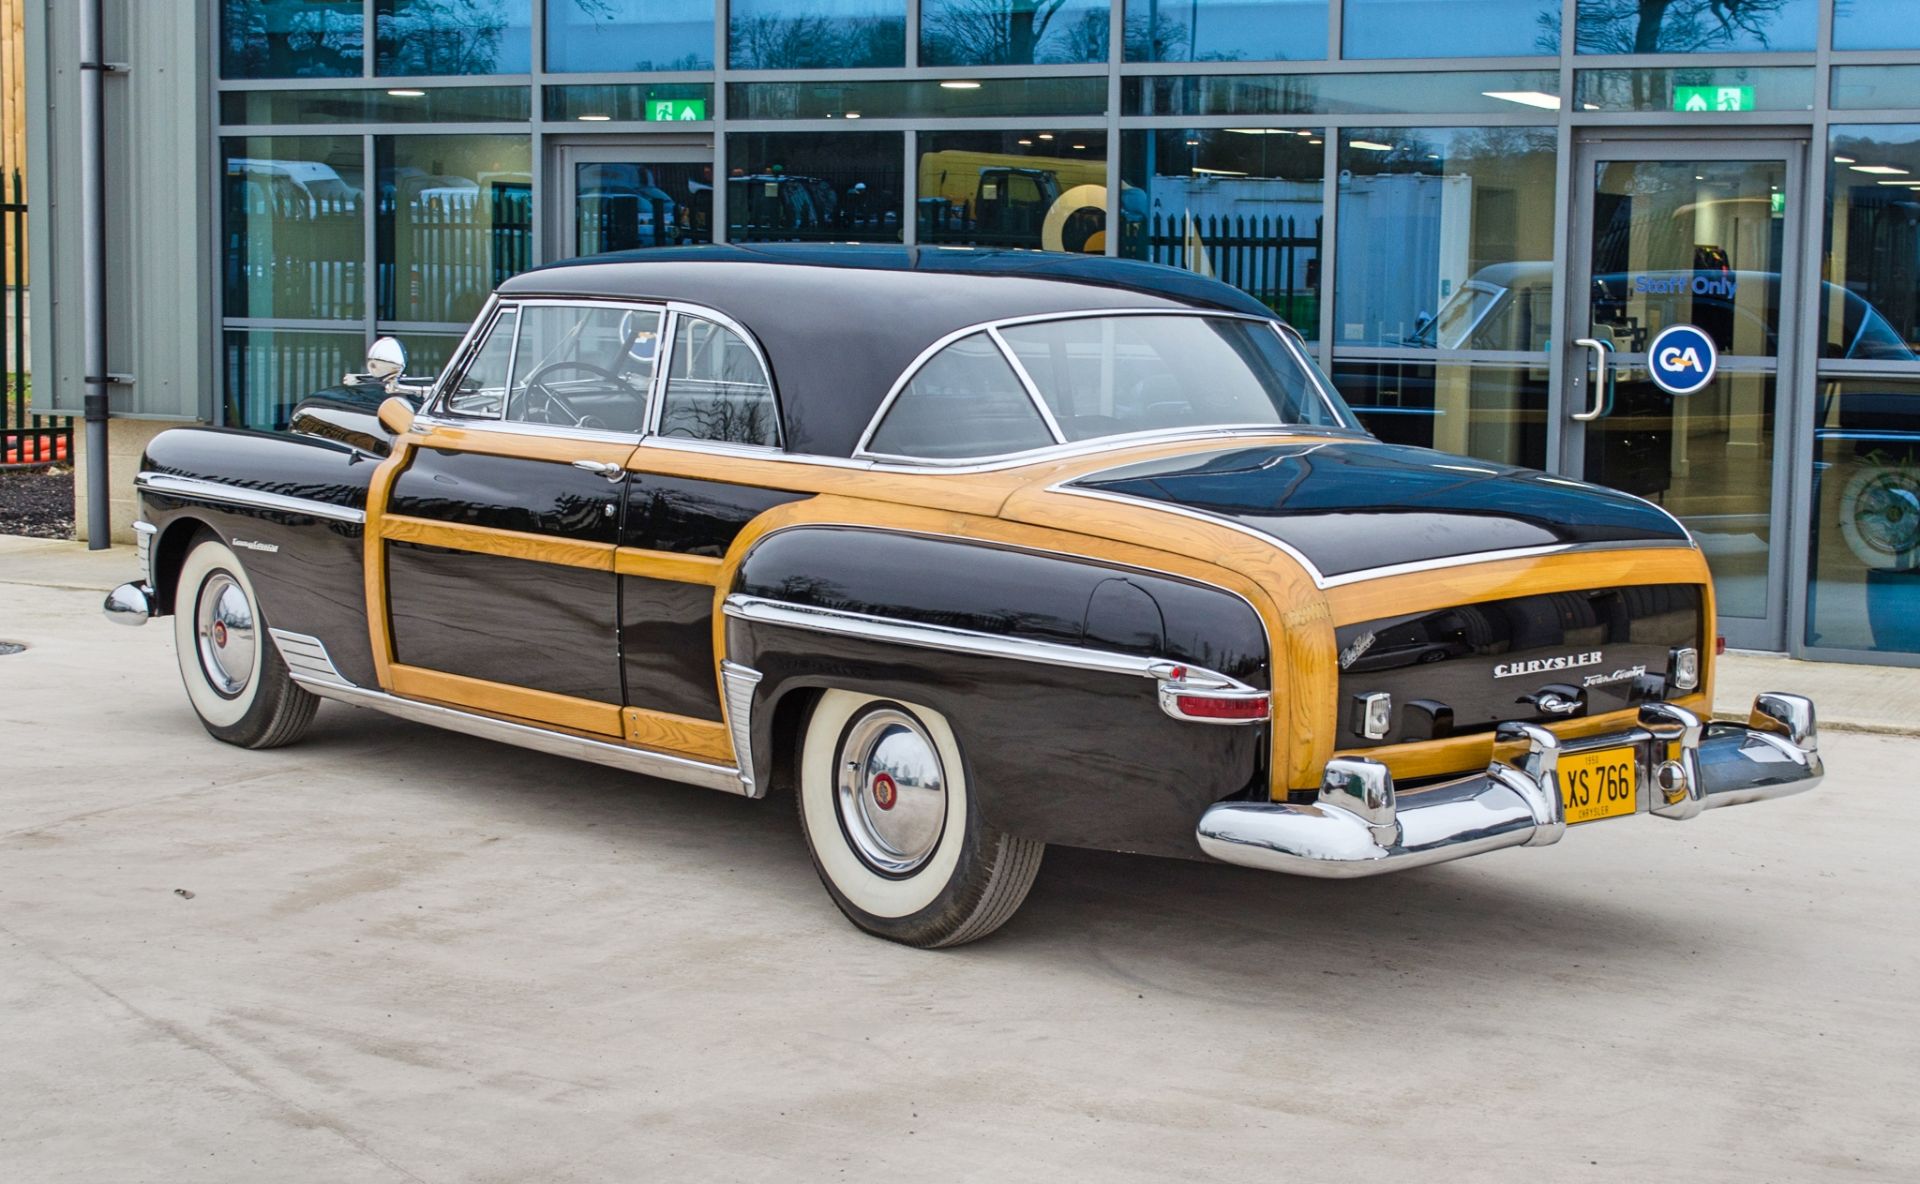 1950 Chrysler Newport Town and Country 5300cc 2 door Coupe - Image 8 of 62